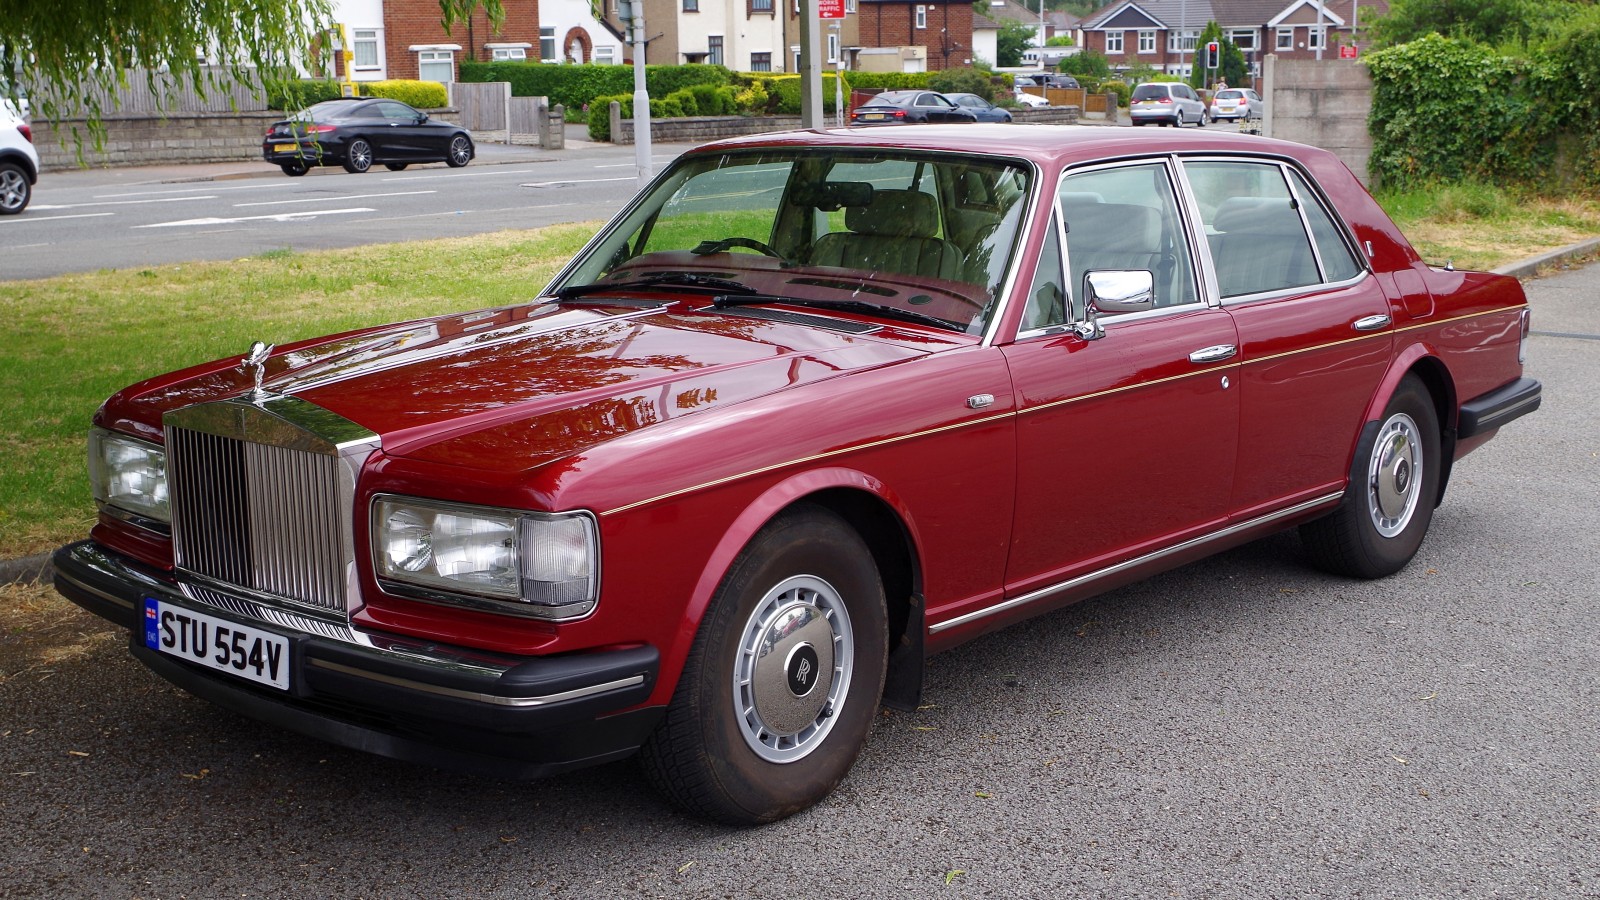 12 £20k ’80s classic cars for sale now | Classic & Sports Car